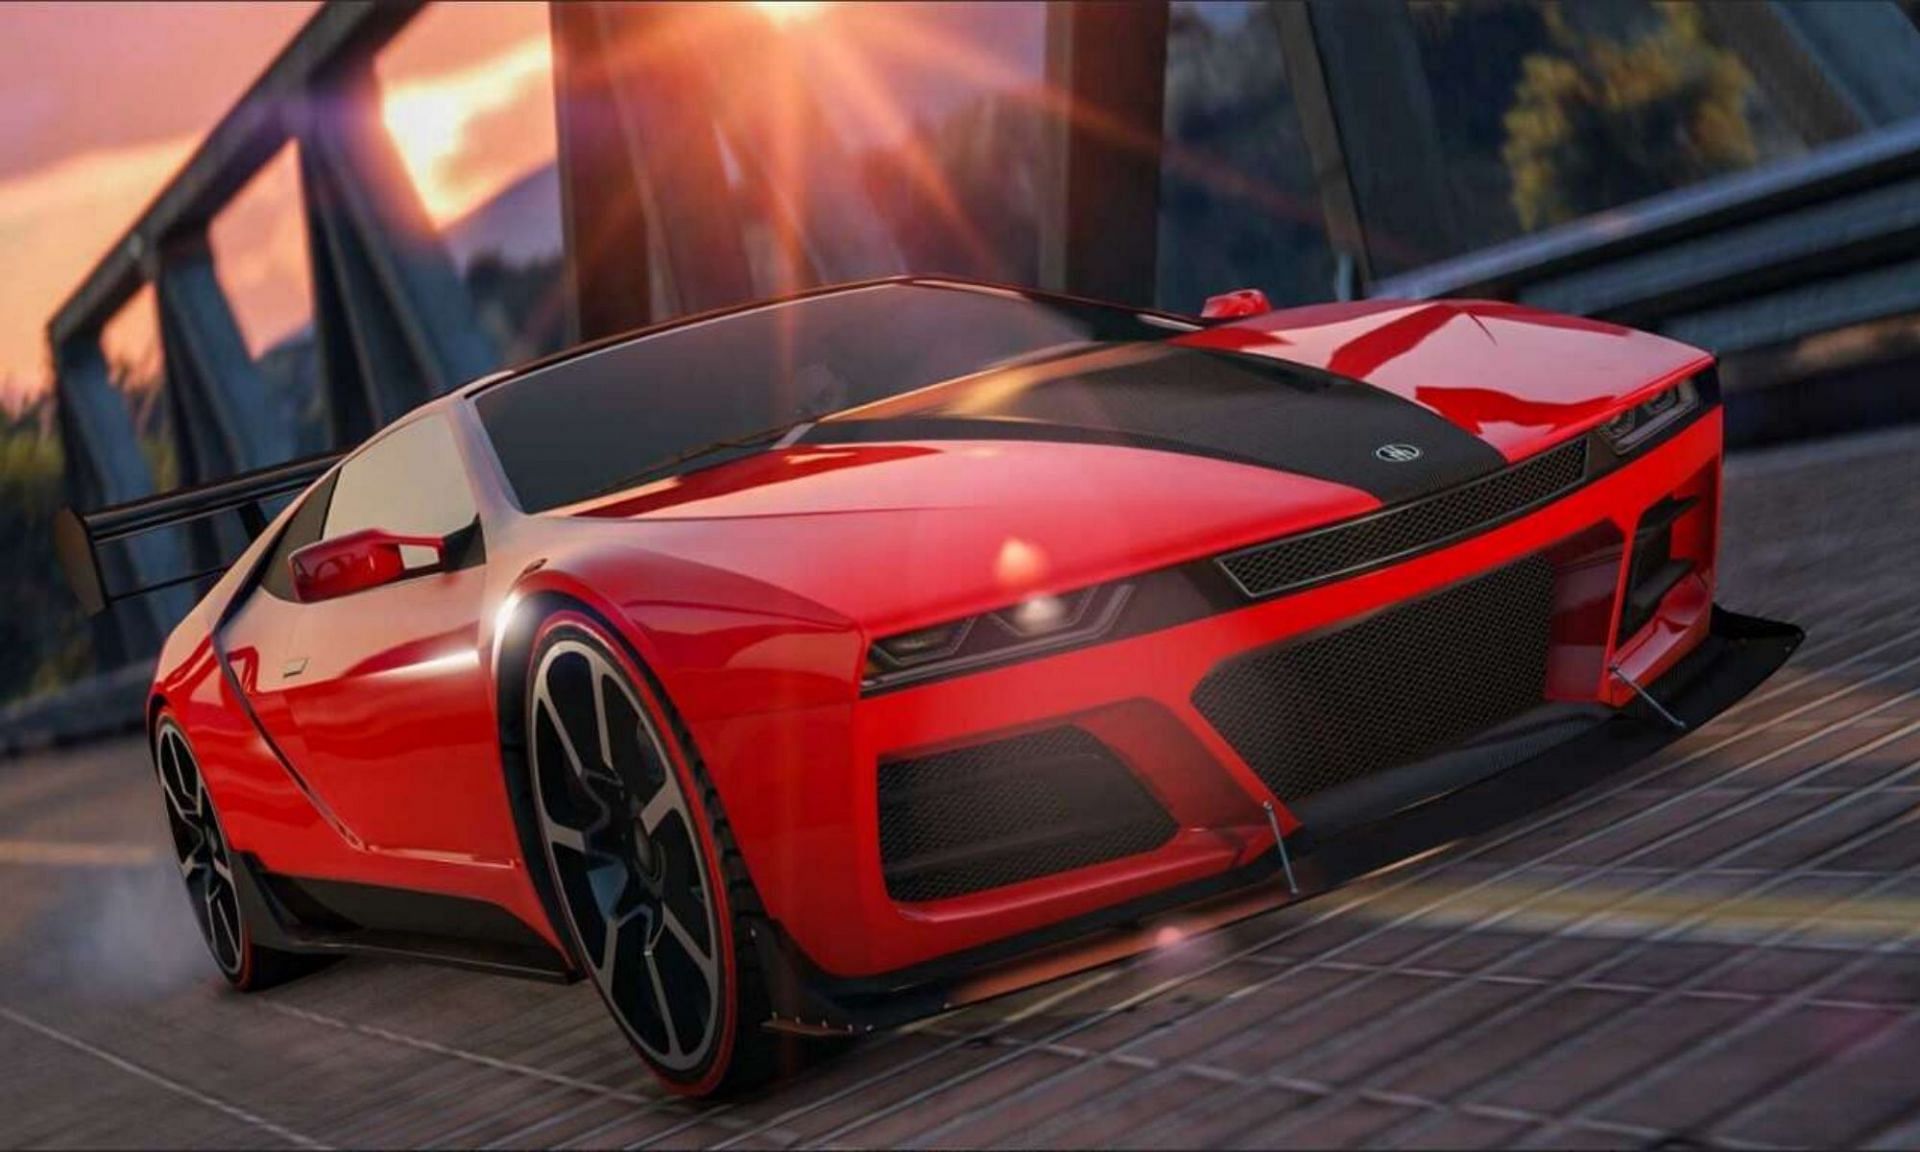 Why don’t GTA Online players care about Community Series races?